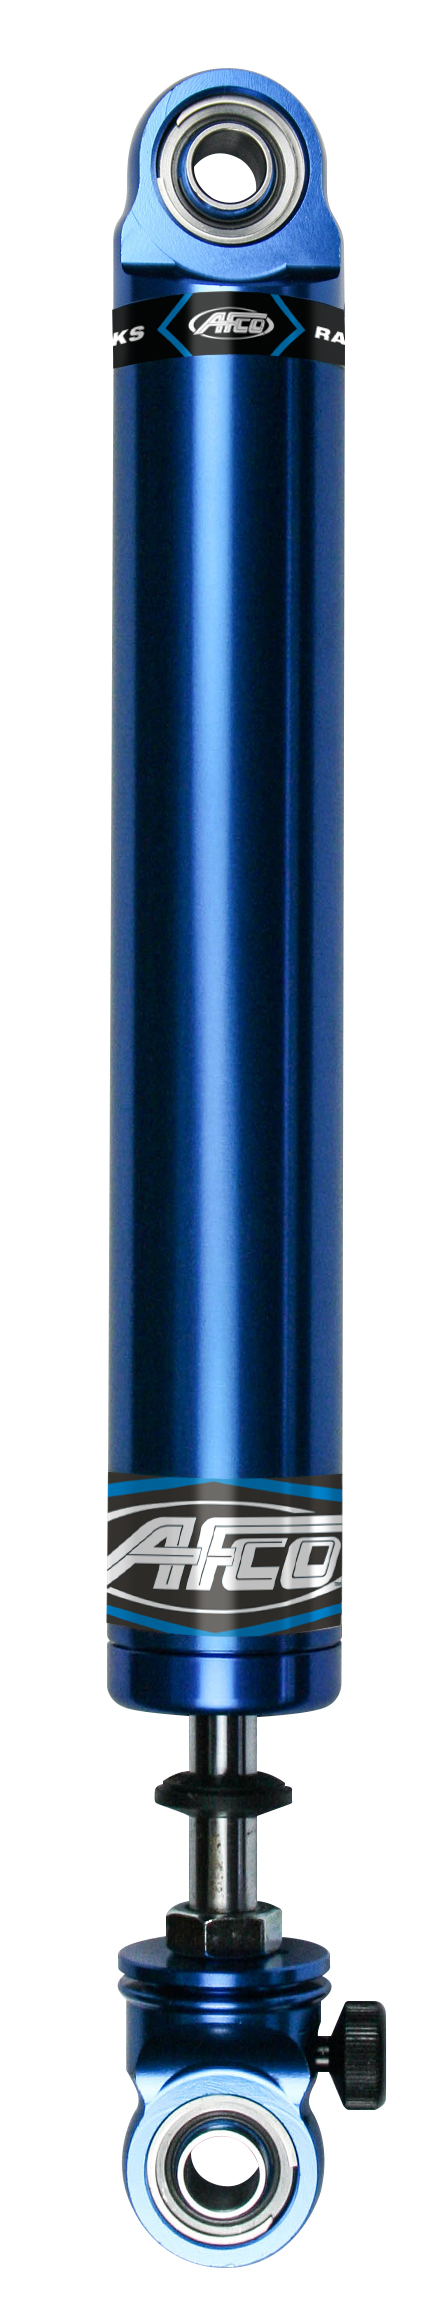 Aluminum Shock Twin Tube 16 Series Small Body 7 Inch Comp 3/Reb 4-8 Smooth